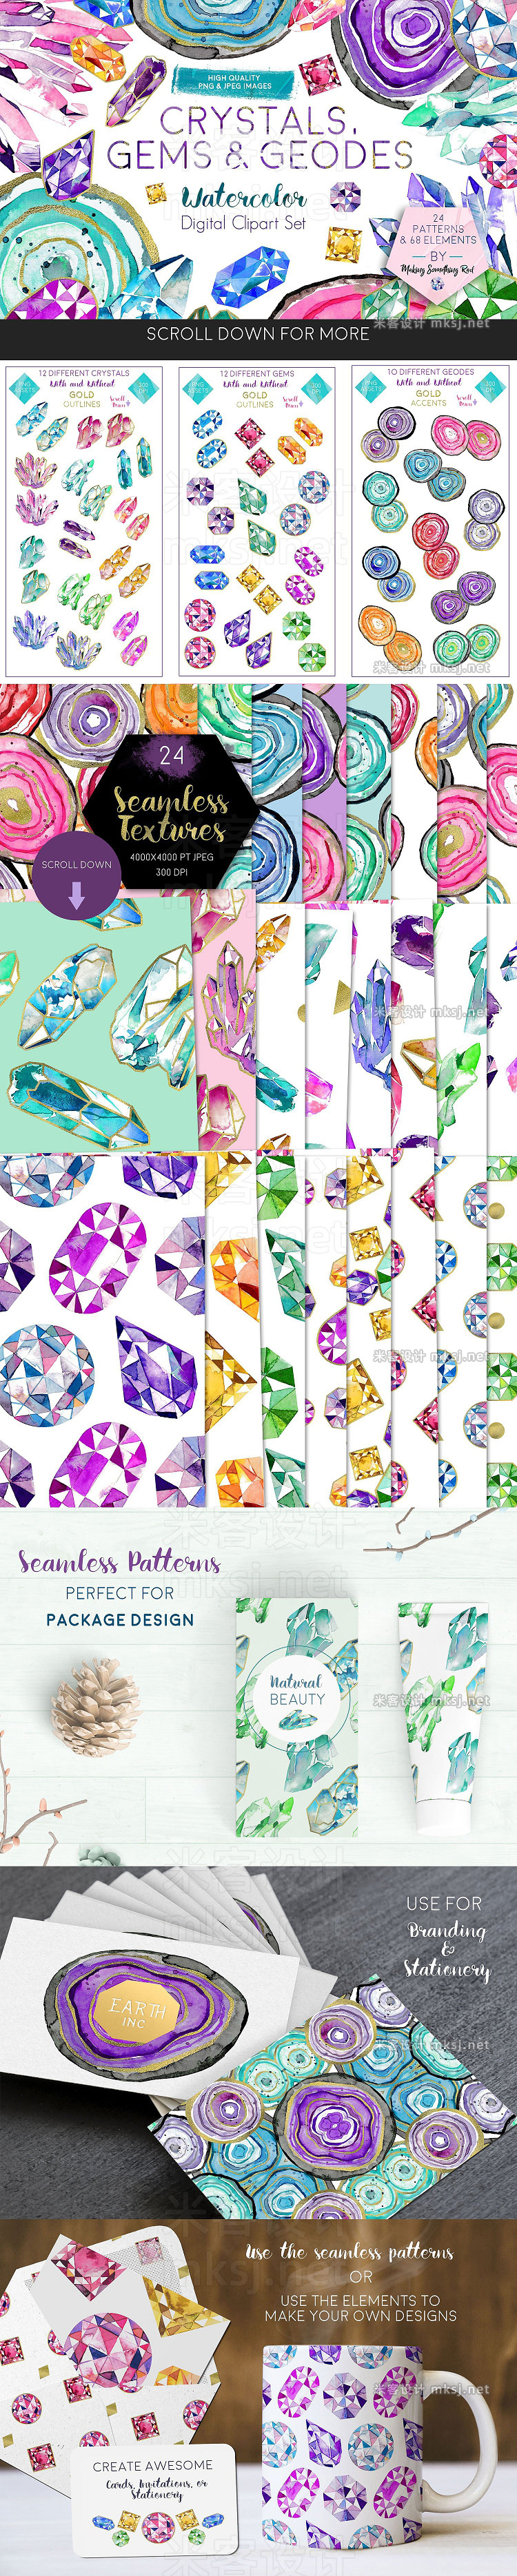 png素材 Crystals Gems Geodes Clipart Set